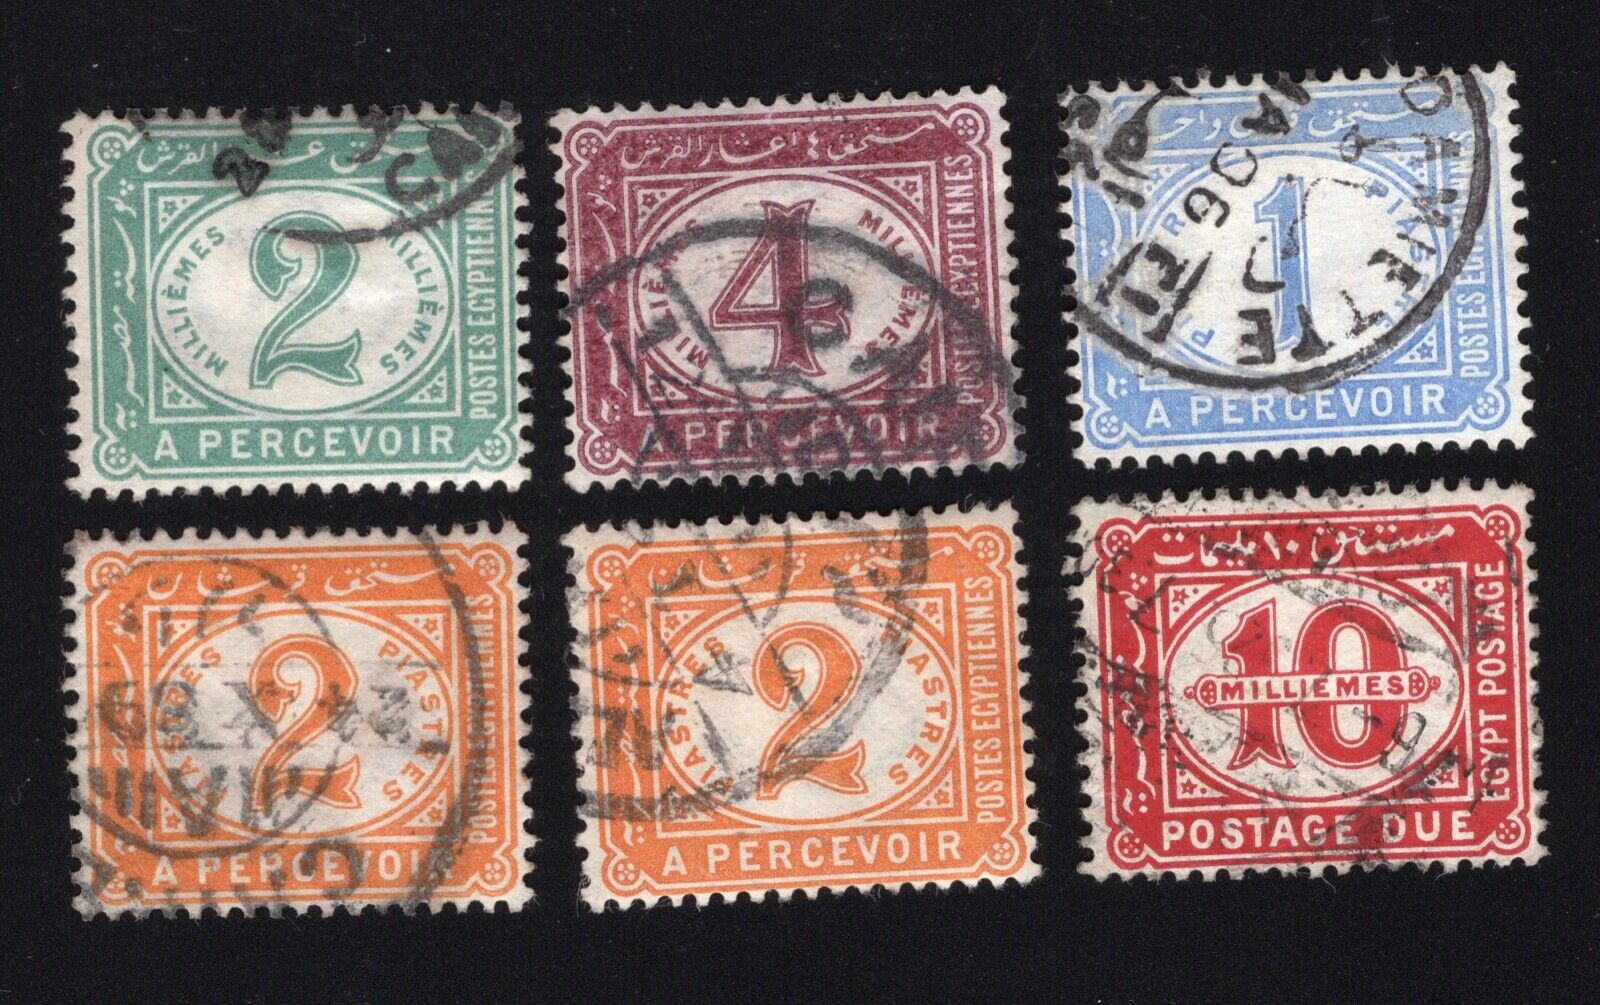 Egypt 1889-21 set of 6 Choice CV8.40$ stamps Gib#D71-D103 used Daily bargain sale